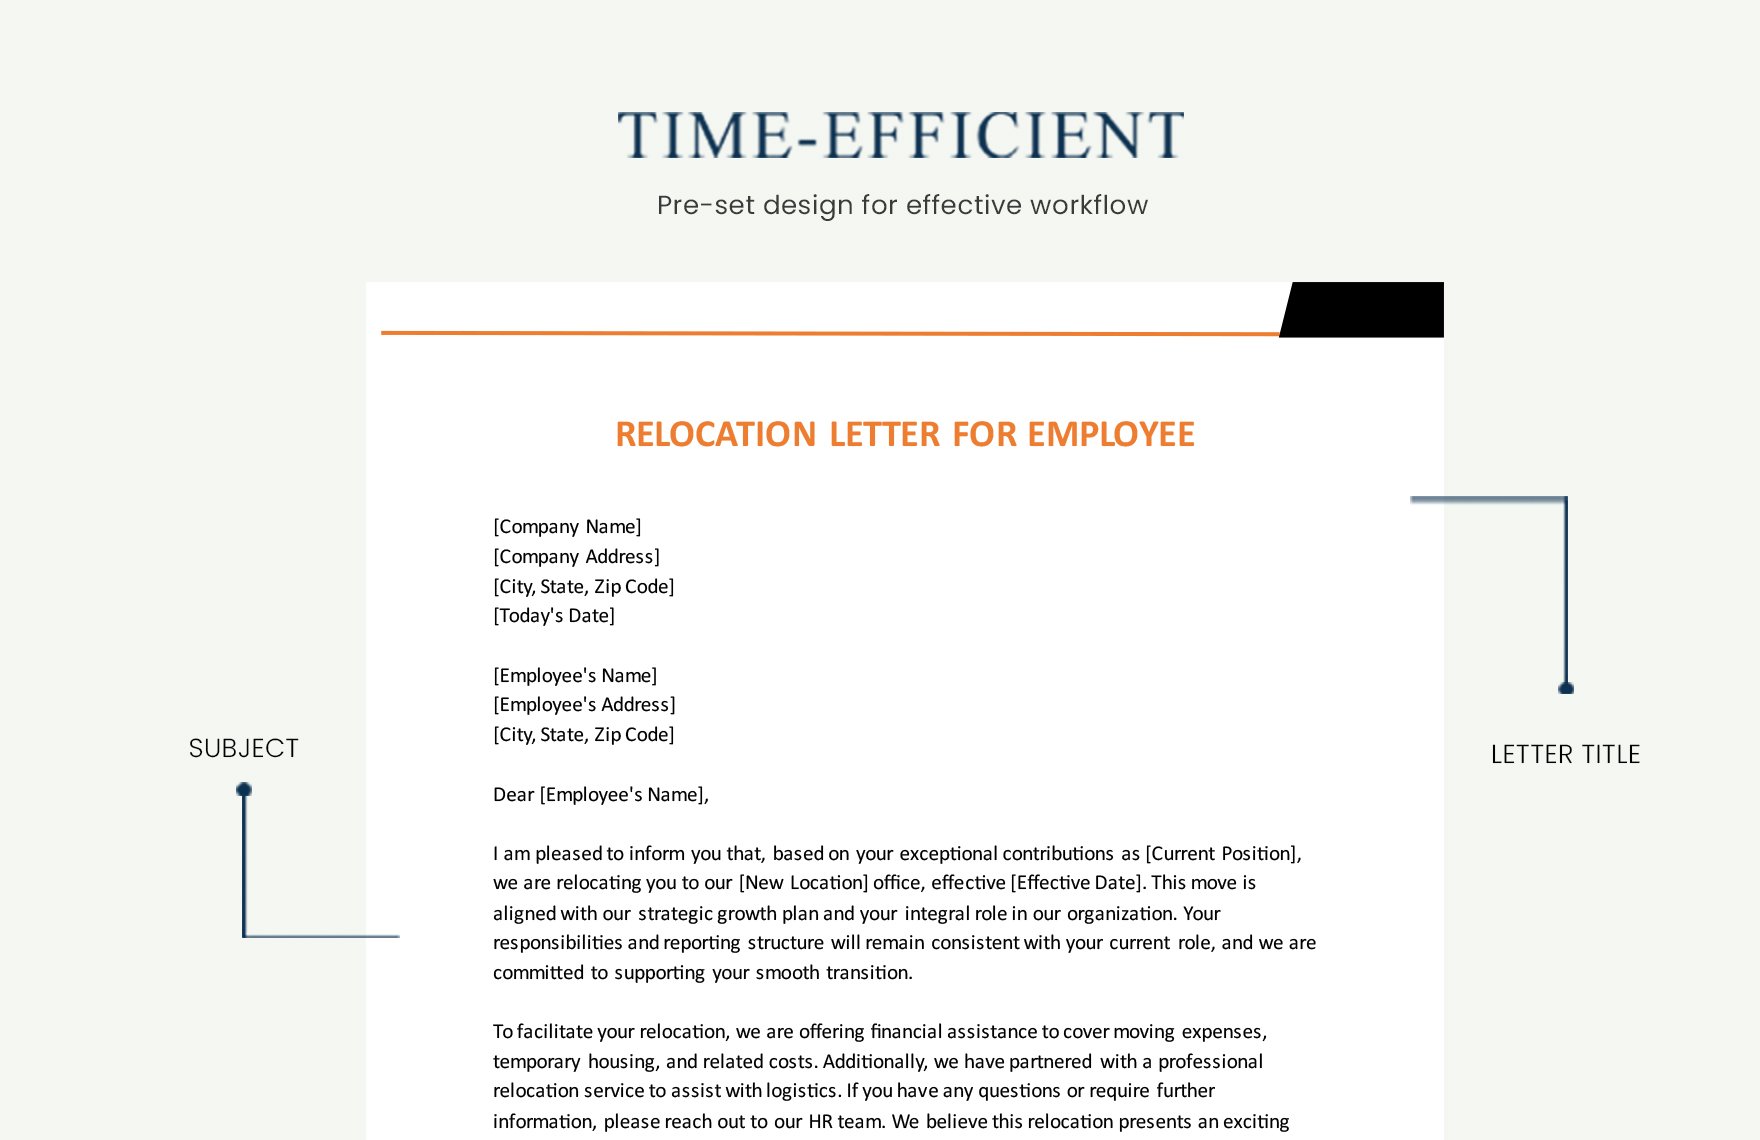 Relocation Letter For Employee